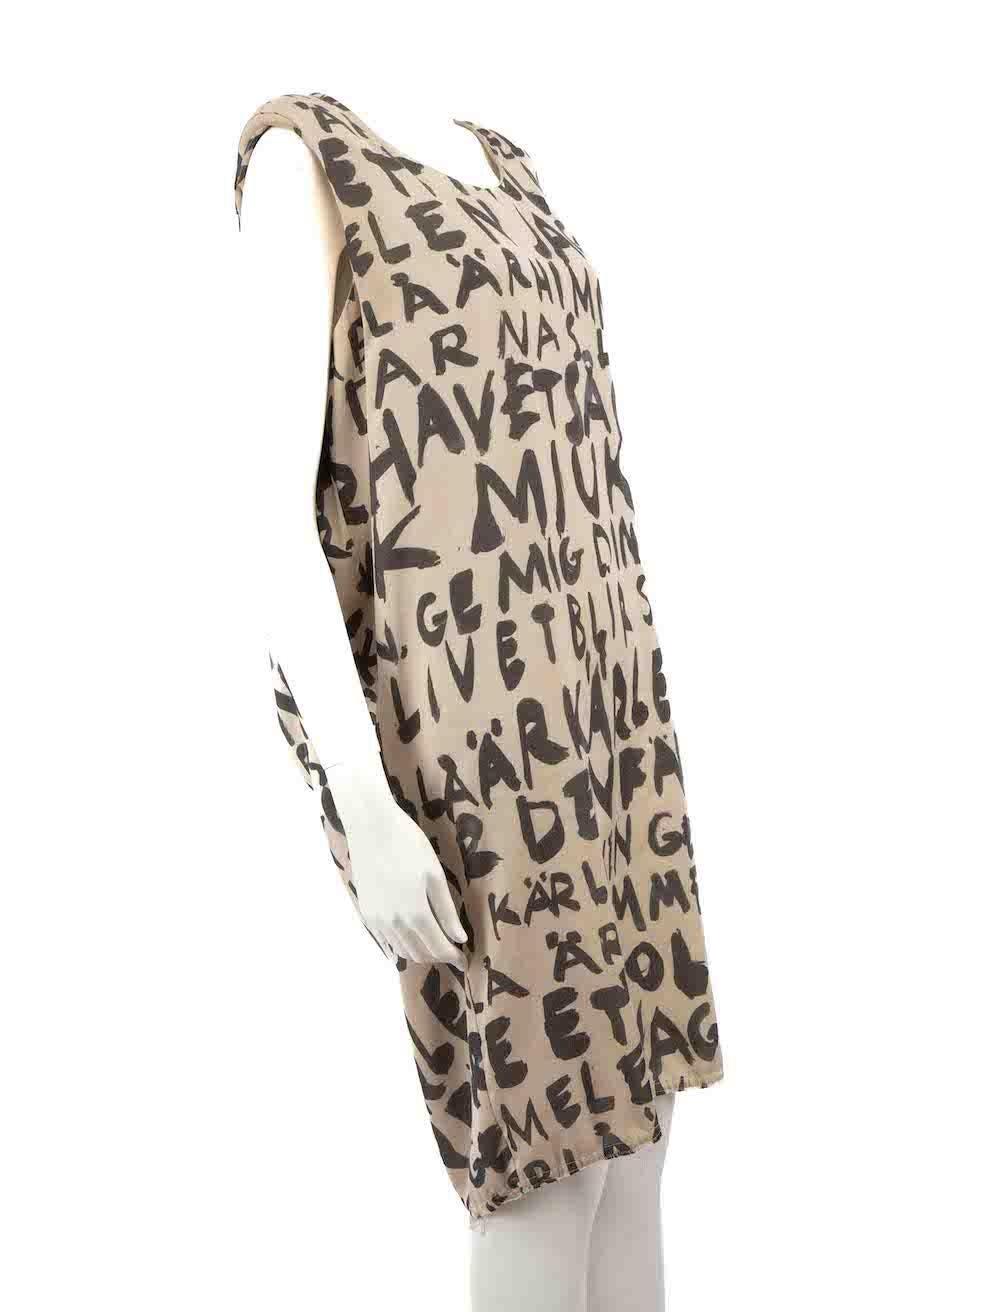 CONDITION is Very good. Minimal wear to dress is evident. Minimal wear to the right underarm with light marks on this used Acne Studios designer resale item.
 
 
 
 Details
 
 
 Beige
 
 Polyester
 
 Shift dress
 
 Lettering print
 
 Sleeveless
 
